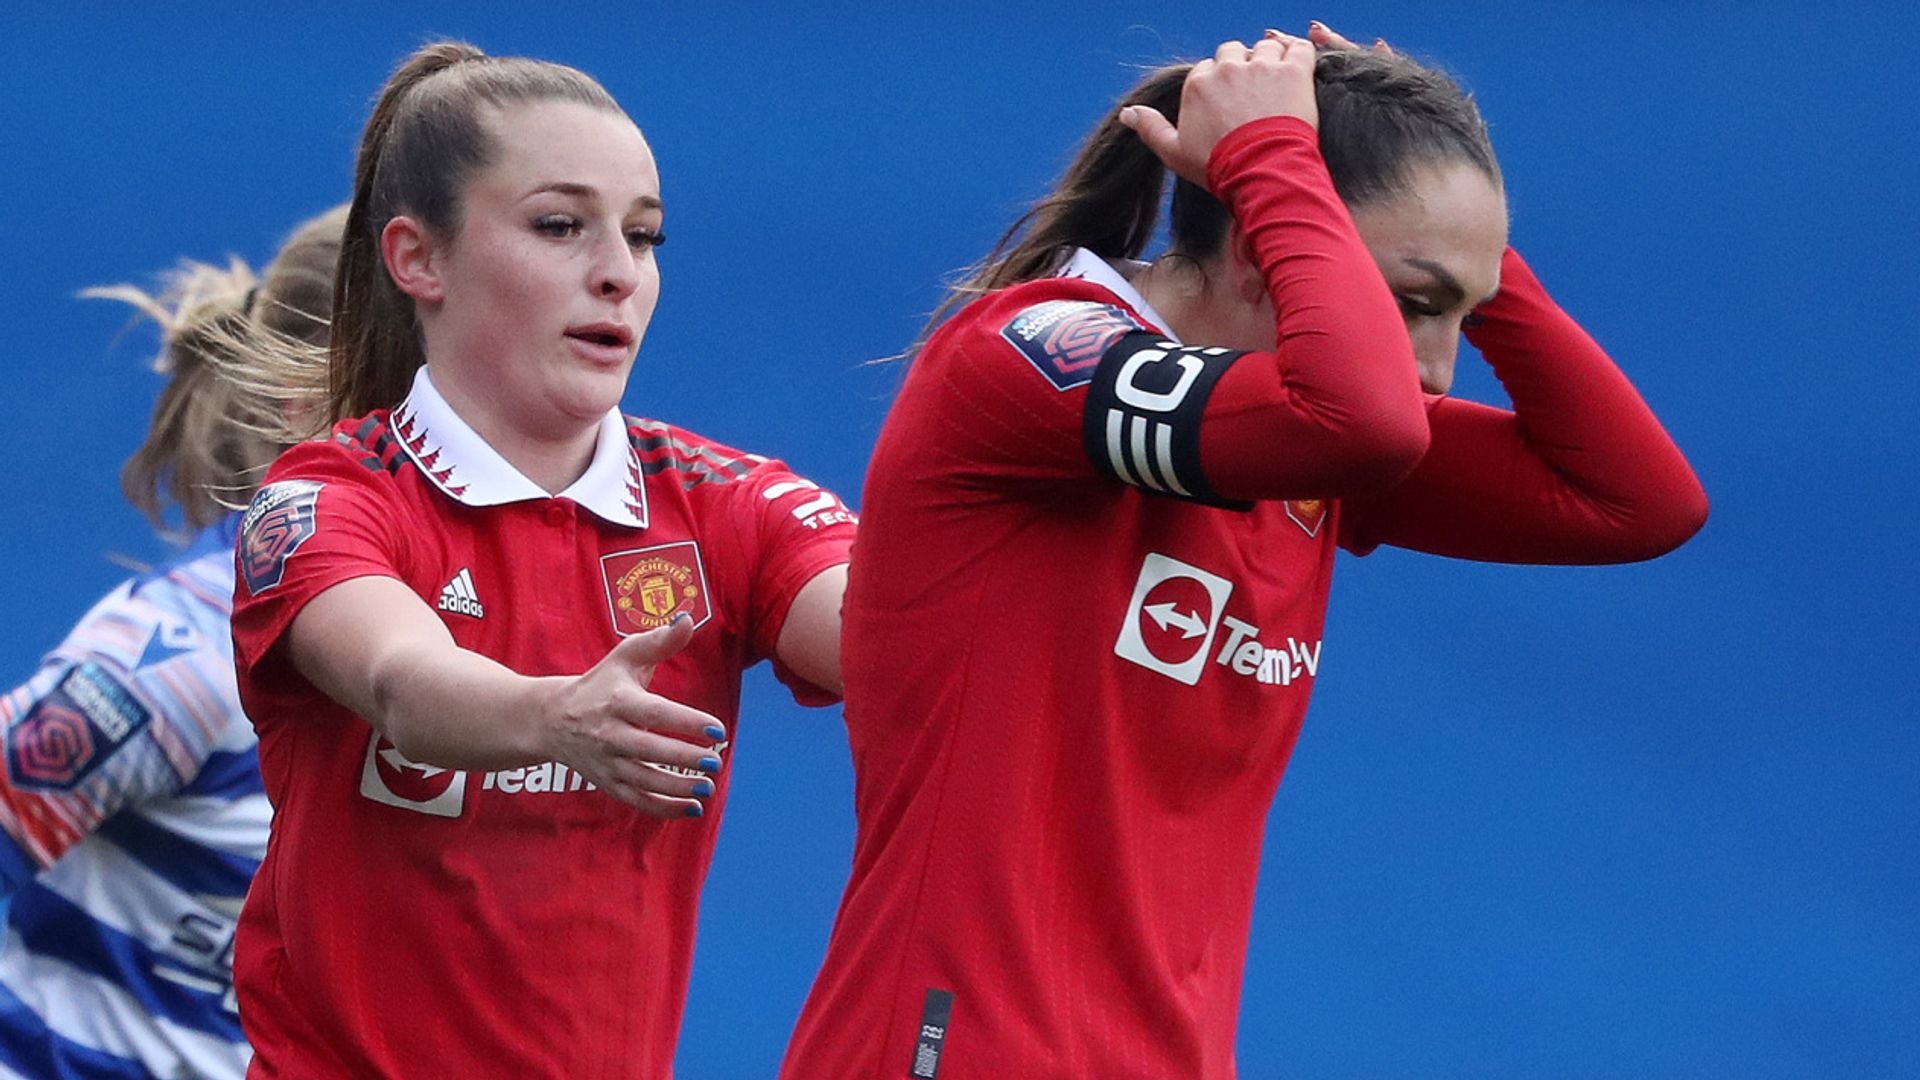 WSL LIVE! Man Utd score late at Reading to go 1-0 up | Everton beating West Ham